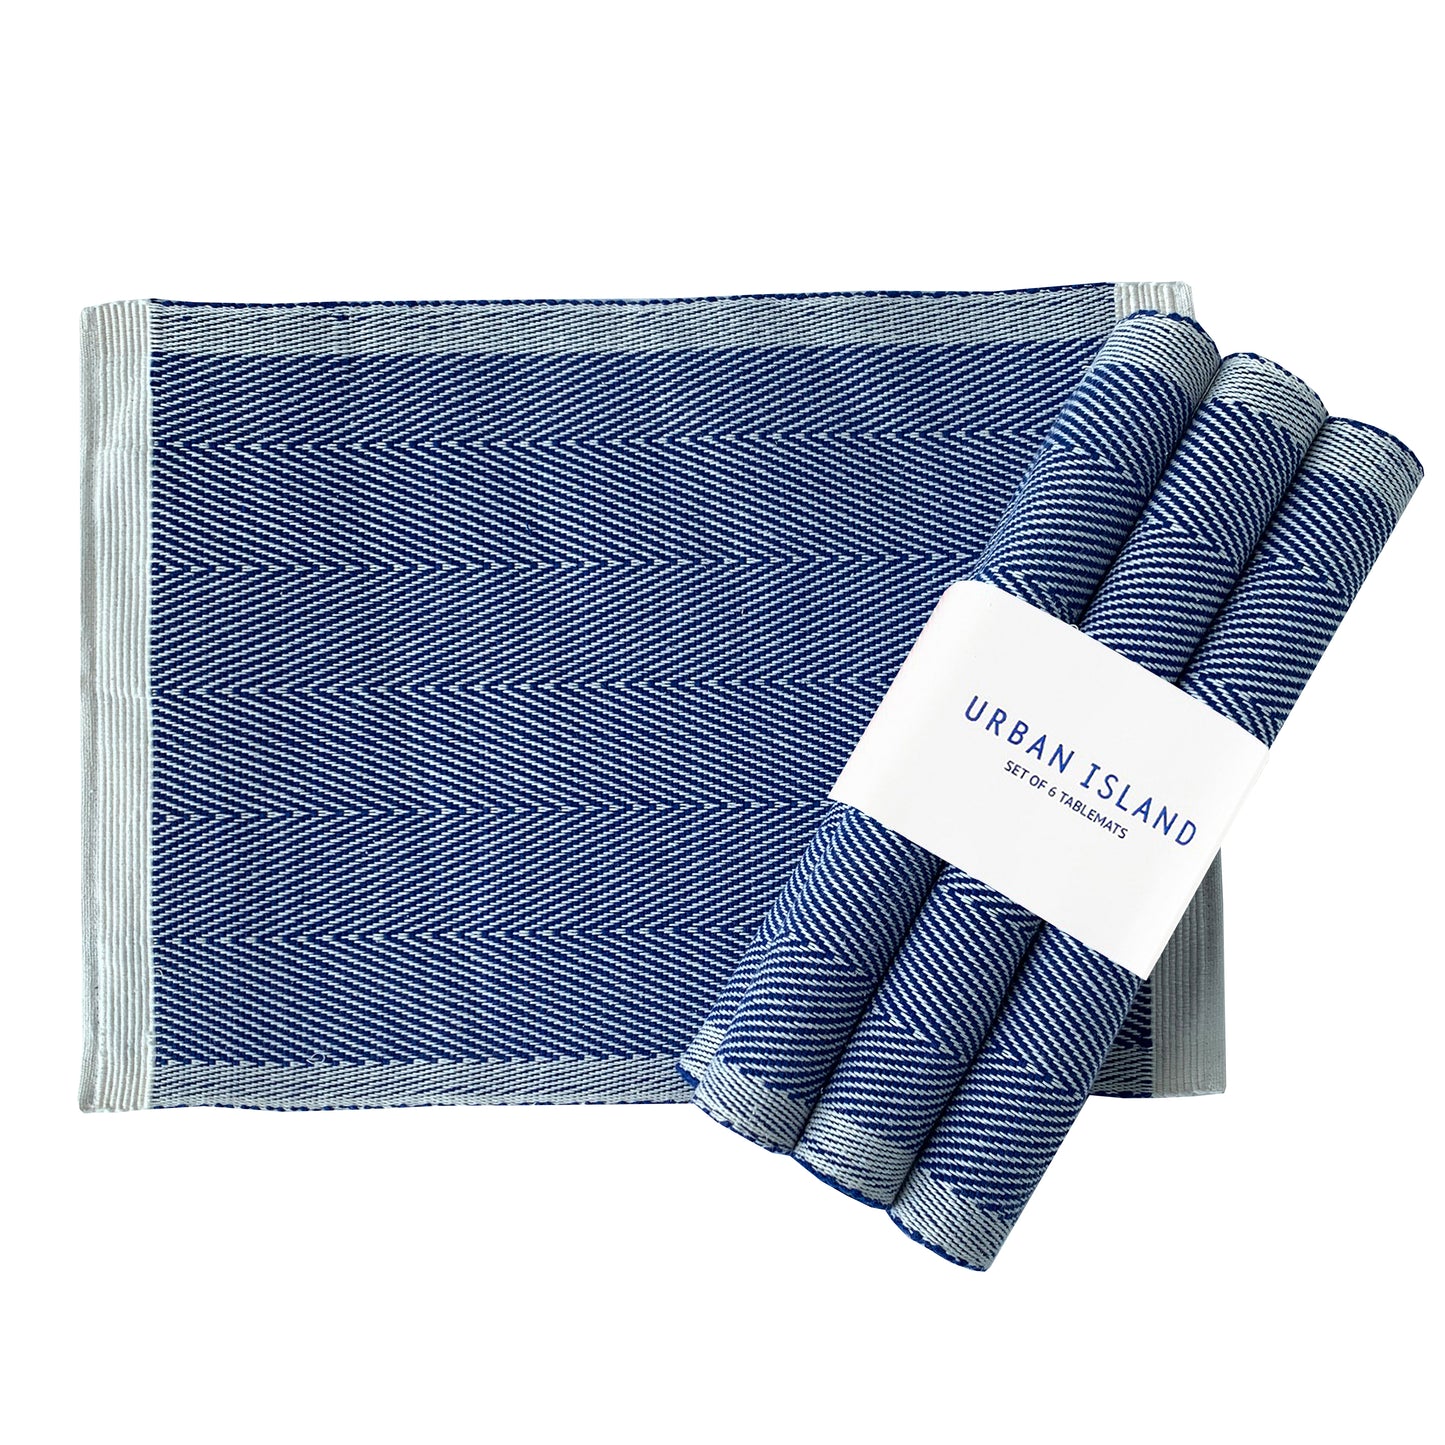 Handwoven Placemat Herring Waves - Single - Blue